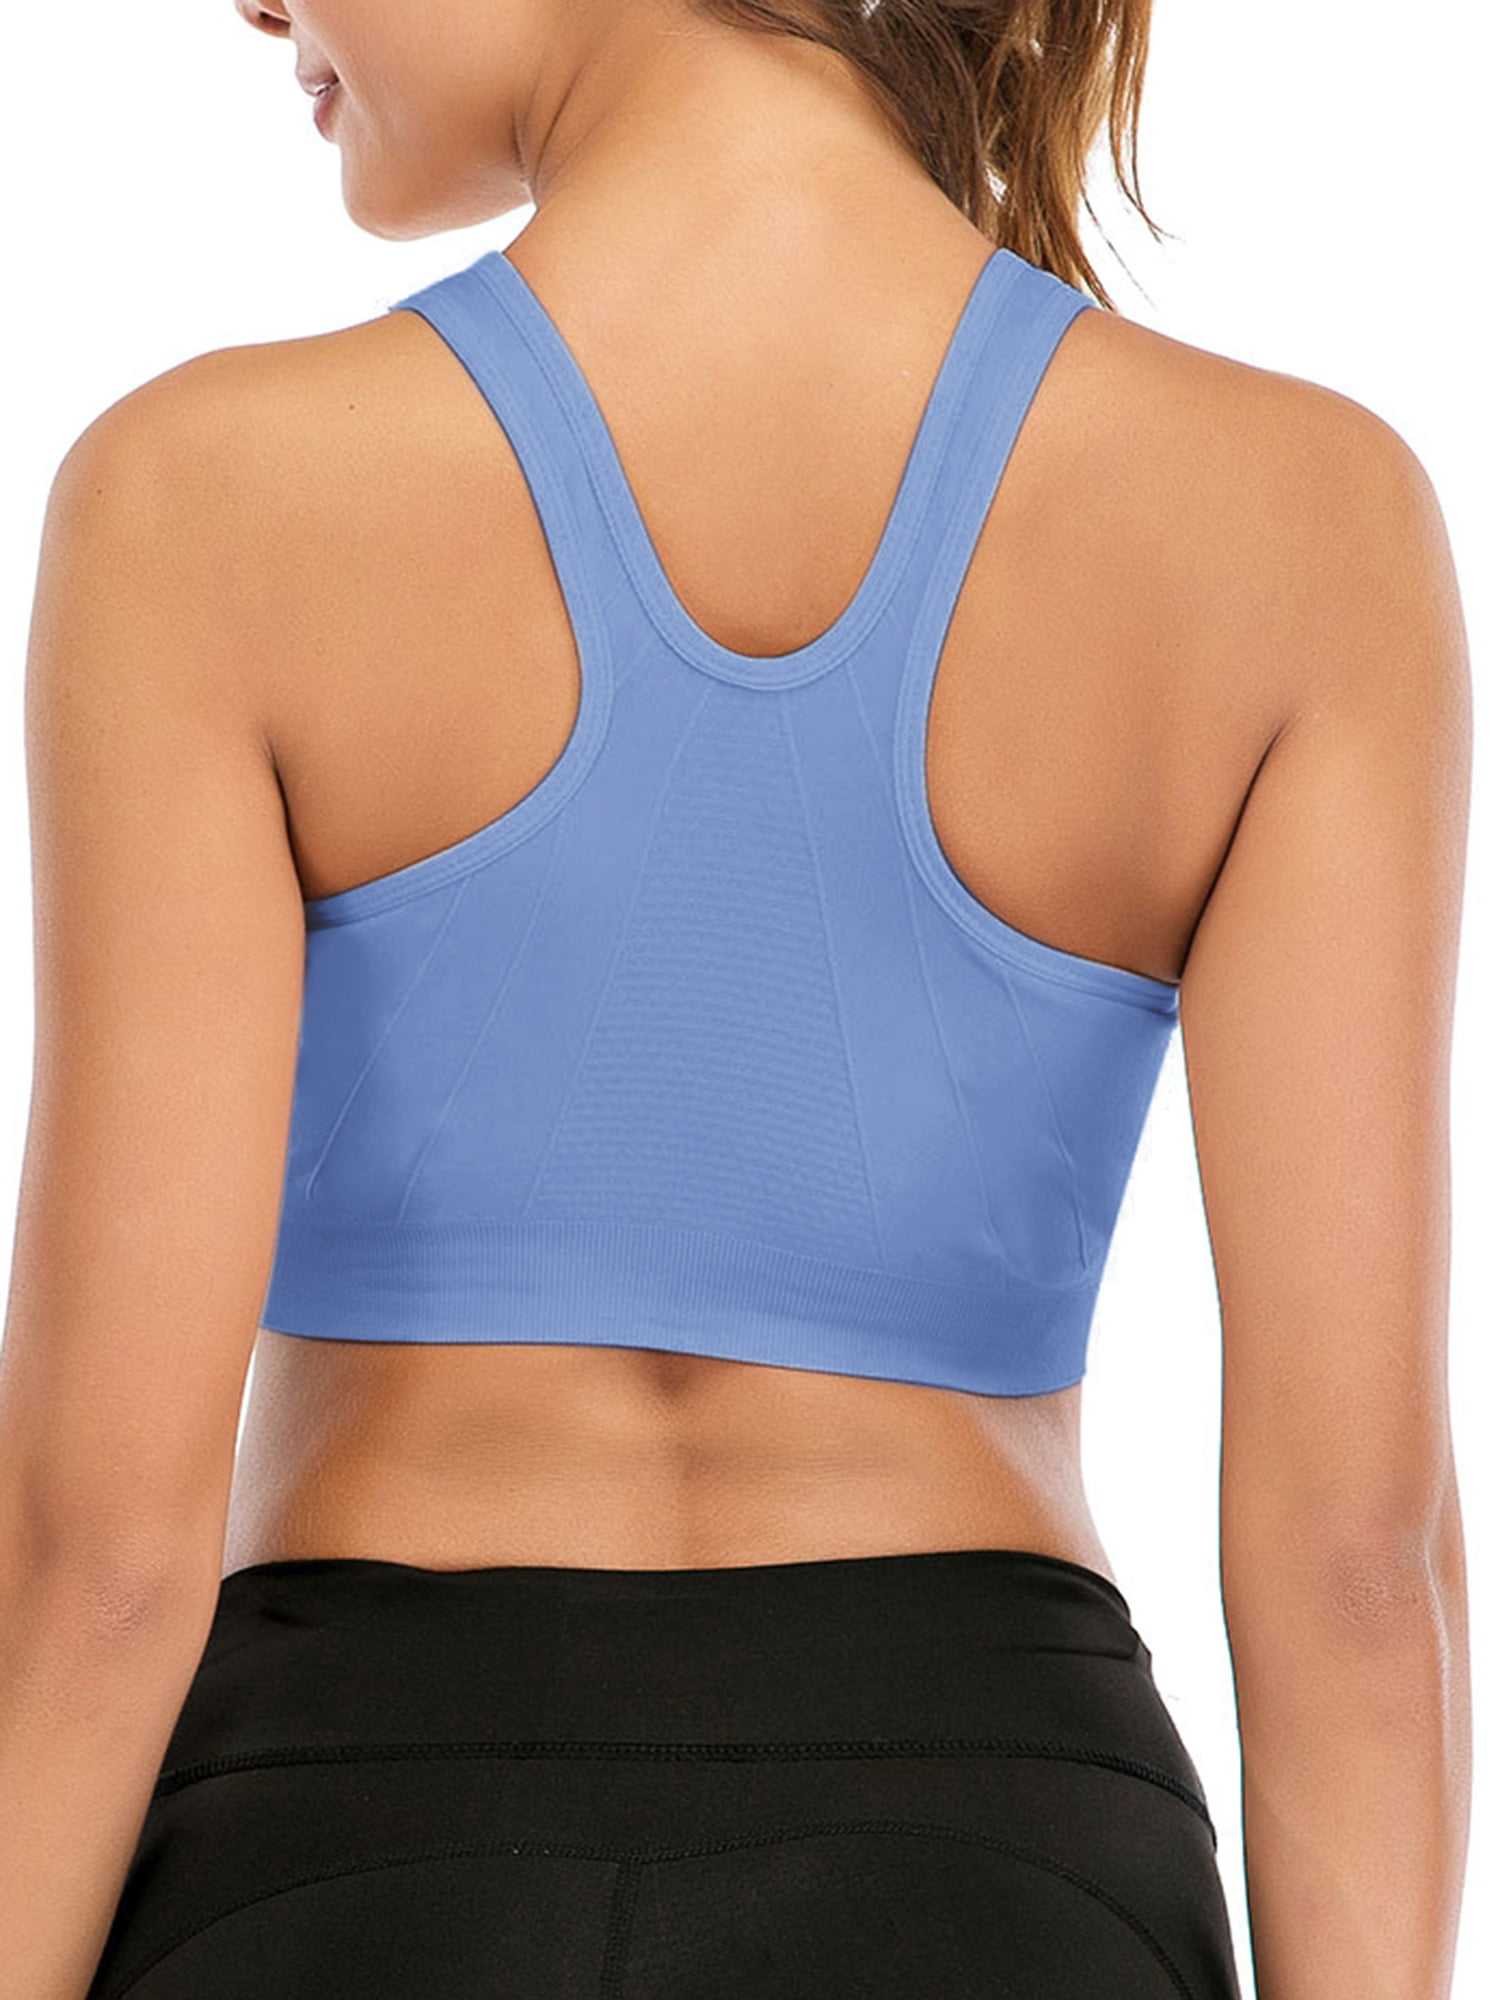 YZACK Front Closure Push-Up Shaping Bra,Skimk Sports Bra - Front Closure 5D  Beauty Back Comfy Bra (Color : Skin color, Size : L) : : Fashion